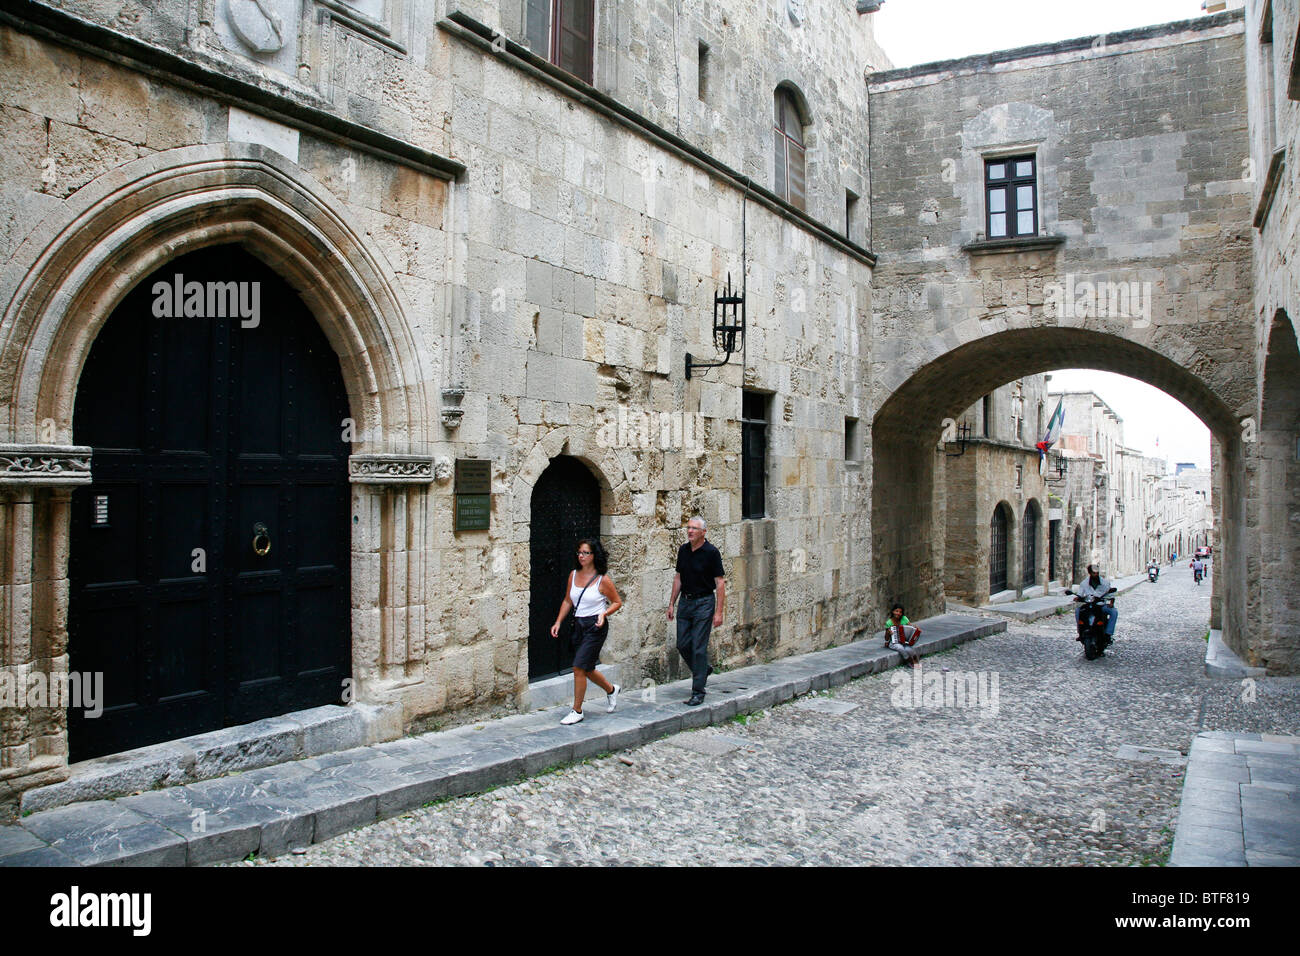 The Avenue of the Knights in Rhodes old Town, Rhodes, Greece. Stock Photo